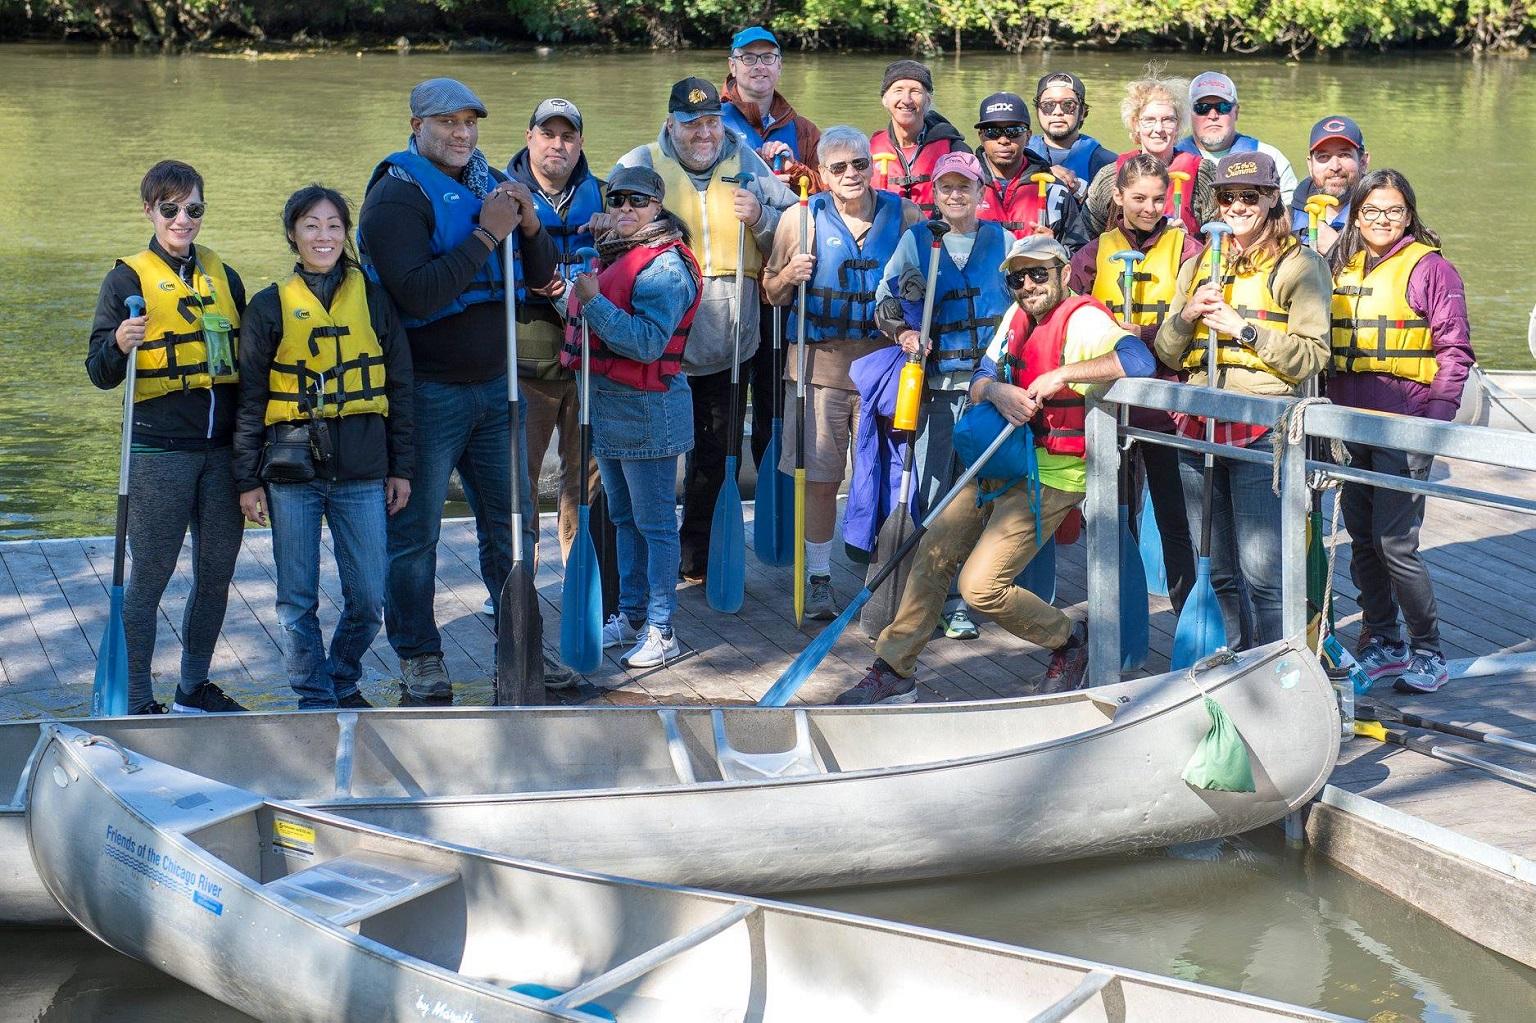 Residents and community leaders pose for a photo during a recent kick-off paddling event for the new Lathrop Riverfront Group. (Courtesy Metropolitan Water Reclamation District of Greater Chicago)